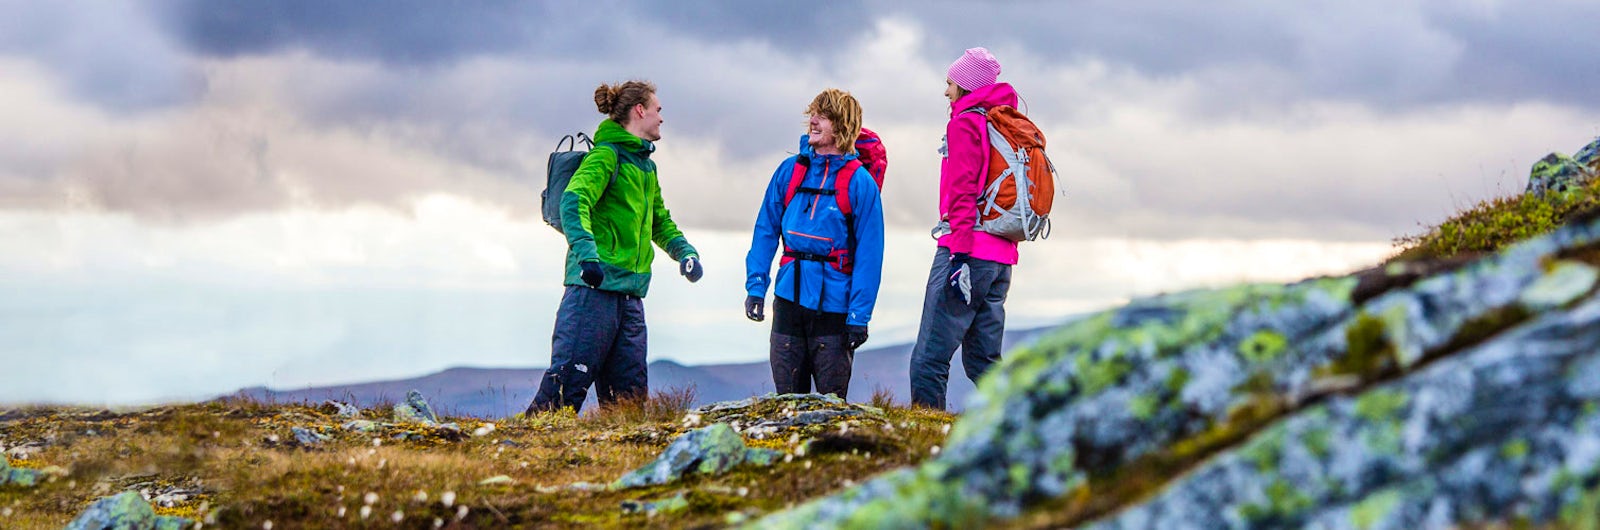 Mountain hikers with colourful jackets